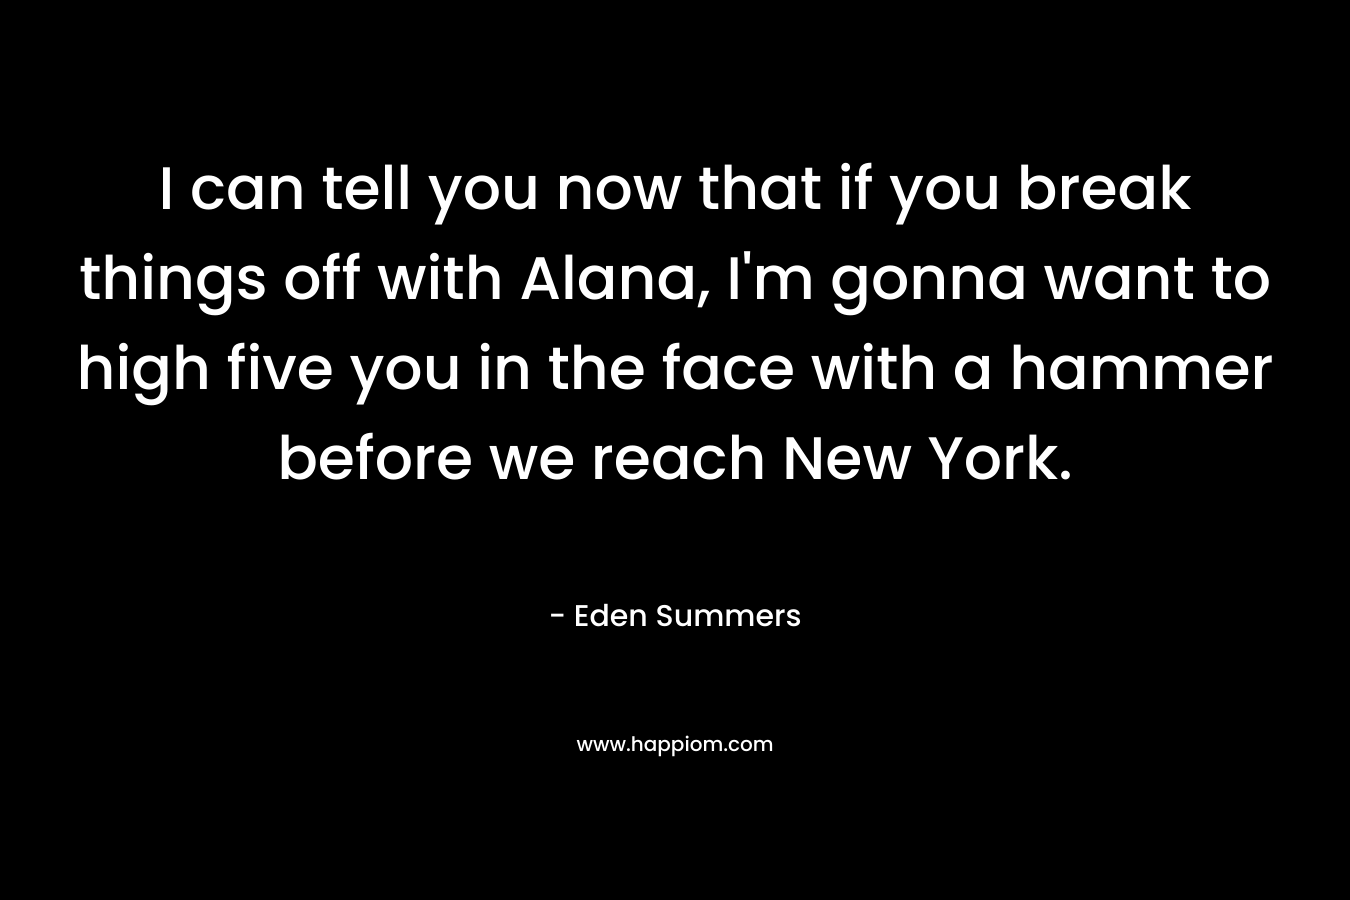 I can tell you now that if you break things off with Alana, I'm gonna want to high five you in the face with a hammer before we reach New York.